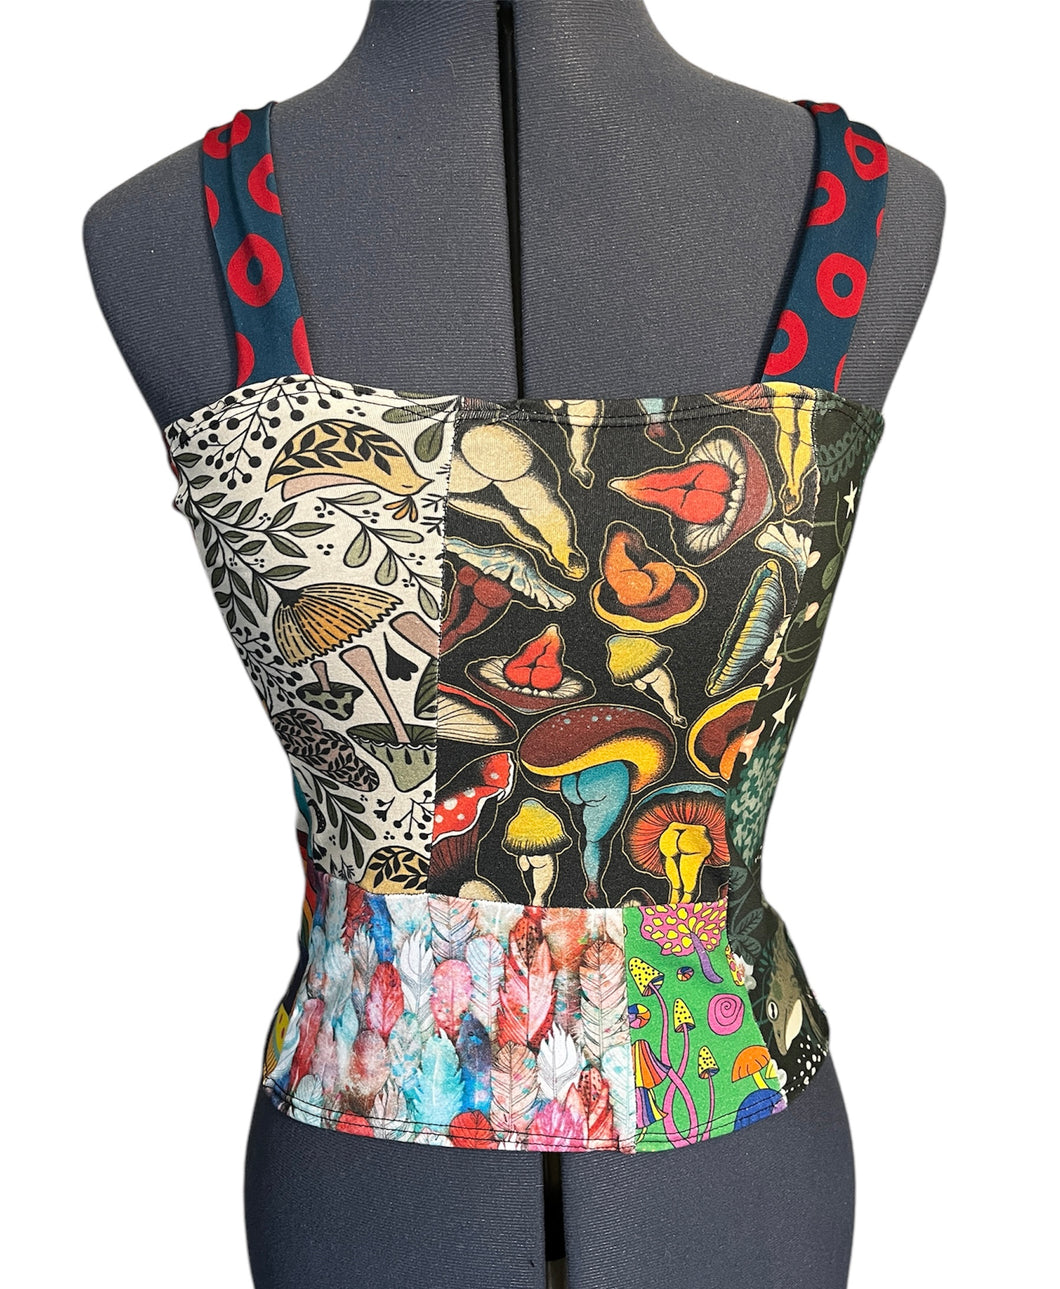 Custom patchwork Top in your size